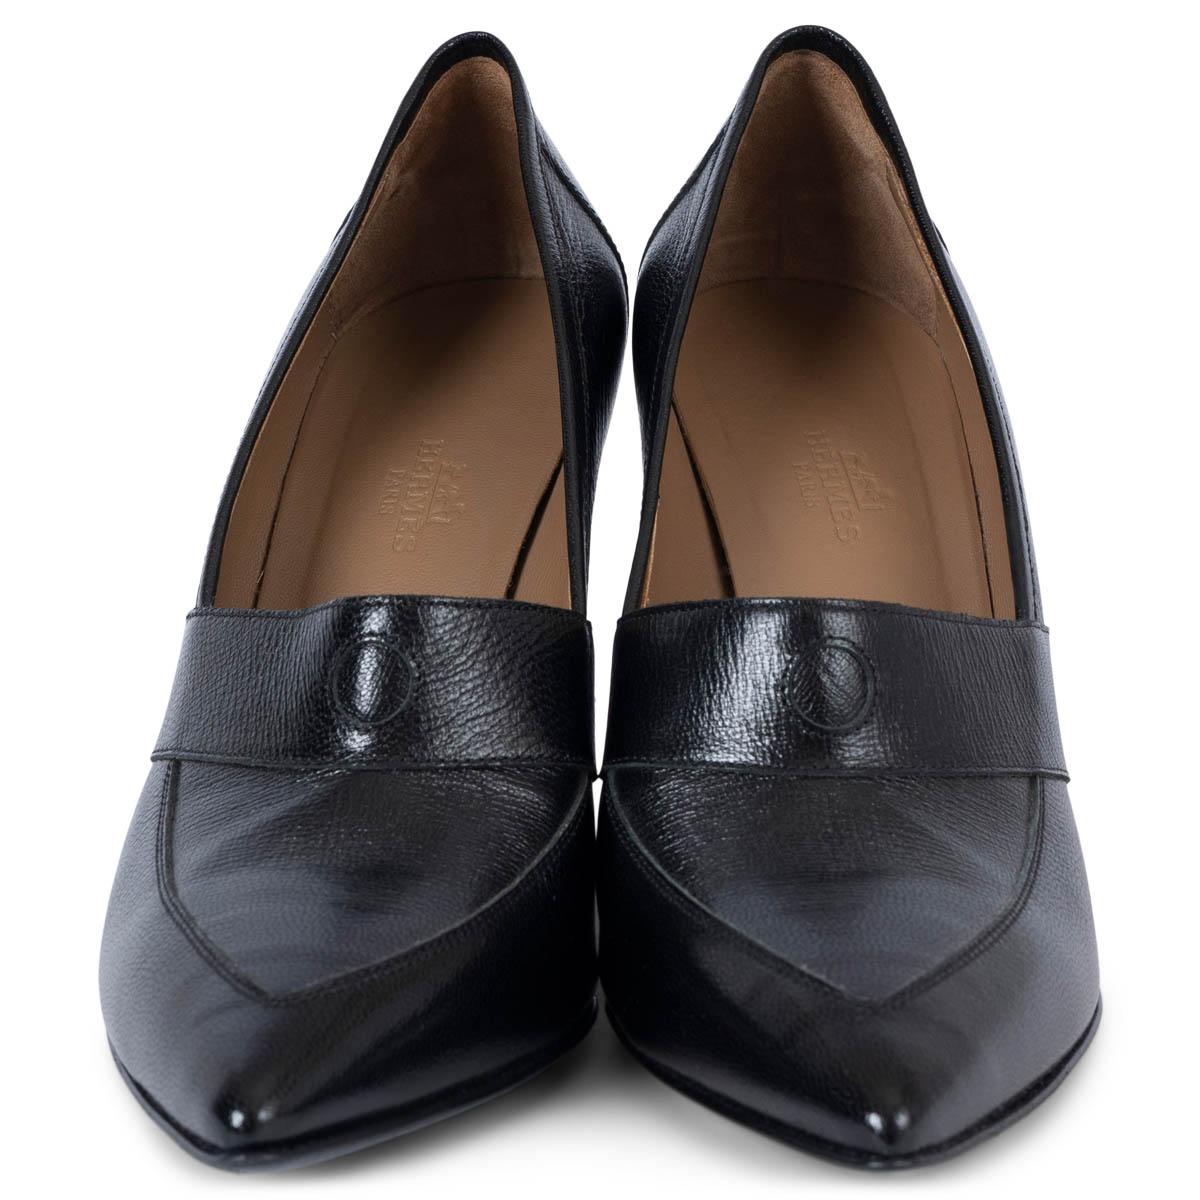 100% authentic Hermès pointed-toe wedge pumps in black grained leather. Have been worn once and are in virtually new condition. Come with dust bags. 

Measurements
Imprinted Size	39
Shoe Size	39
Inside Sole	26cm (10.1in)
Width	7.5cm (2.9in)
Heel	9cm